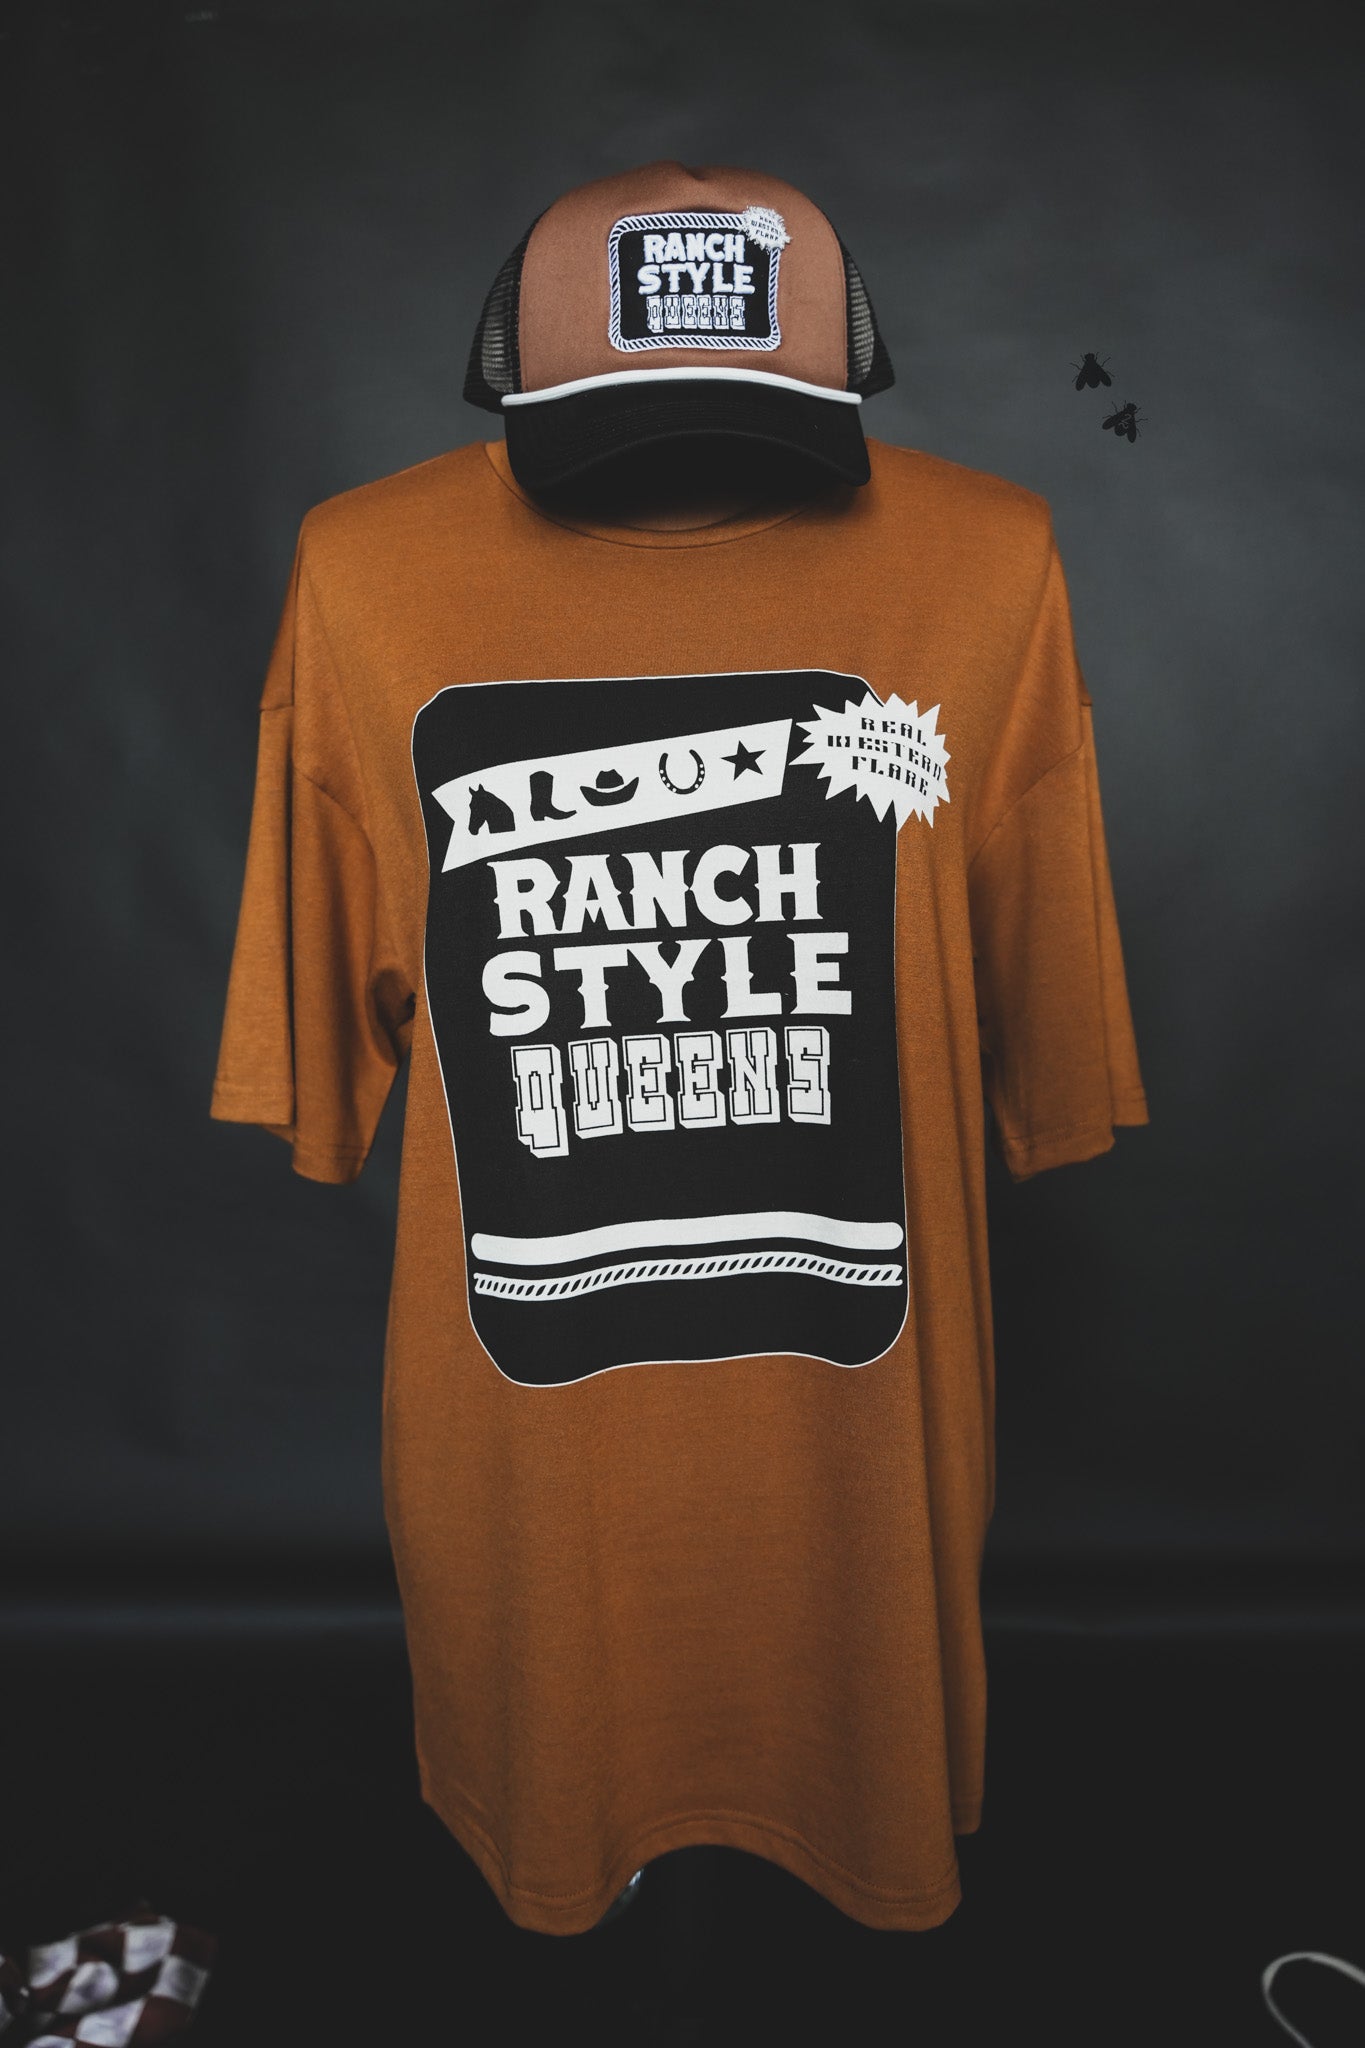 RANCH STYLE